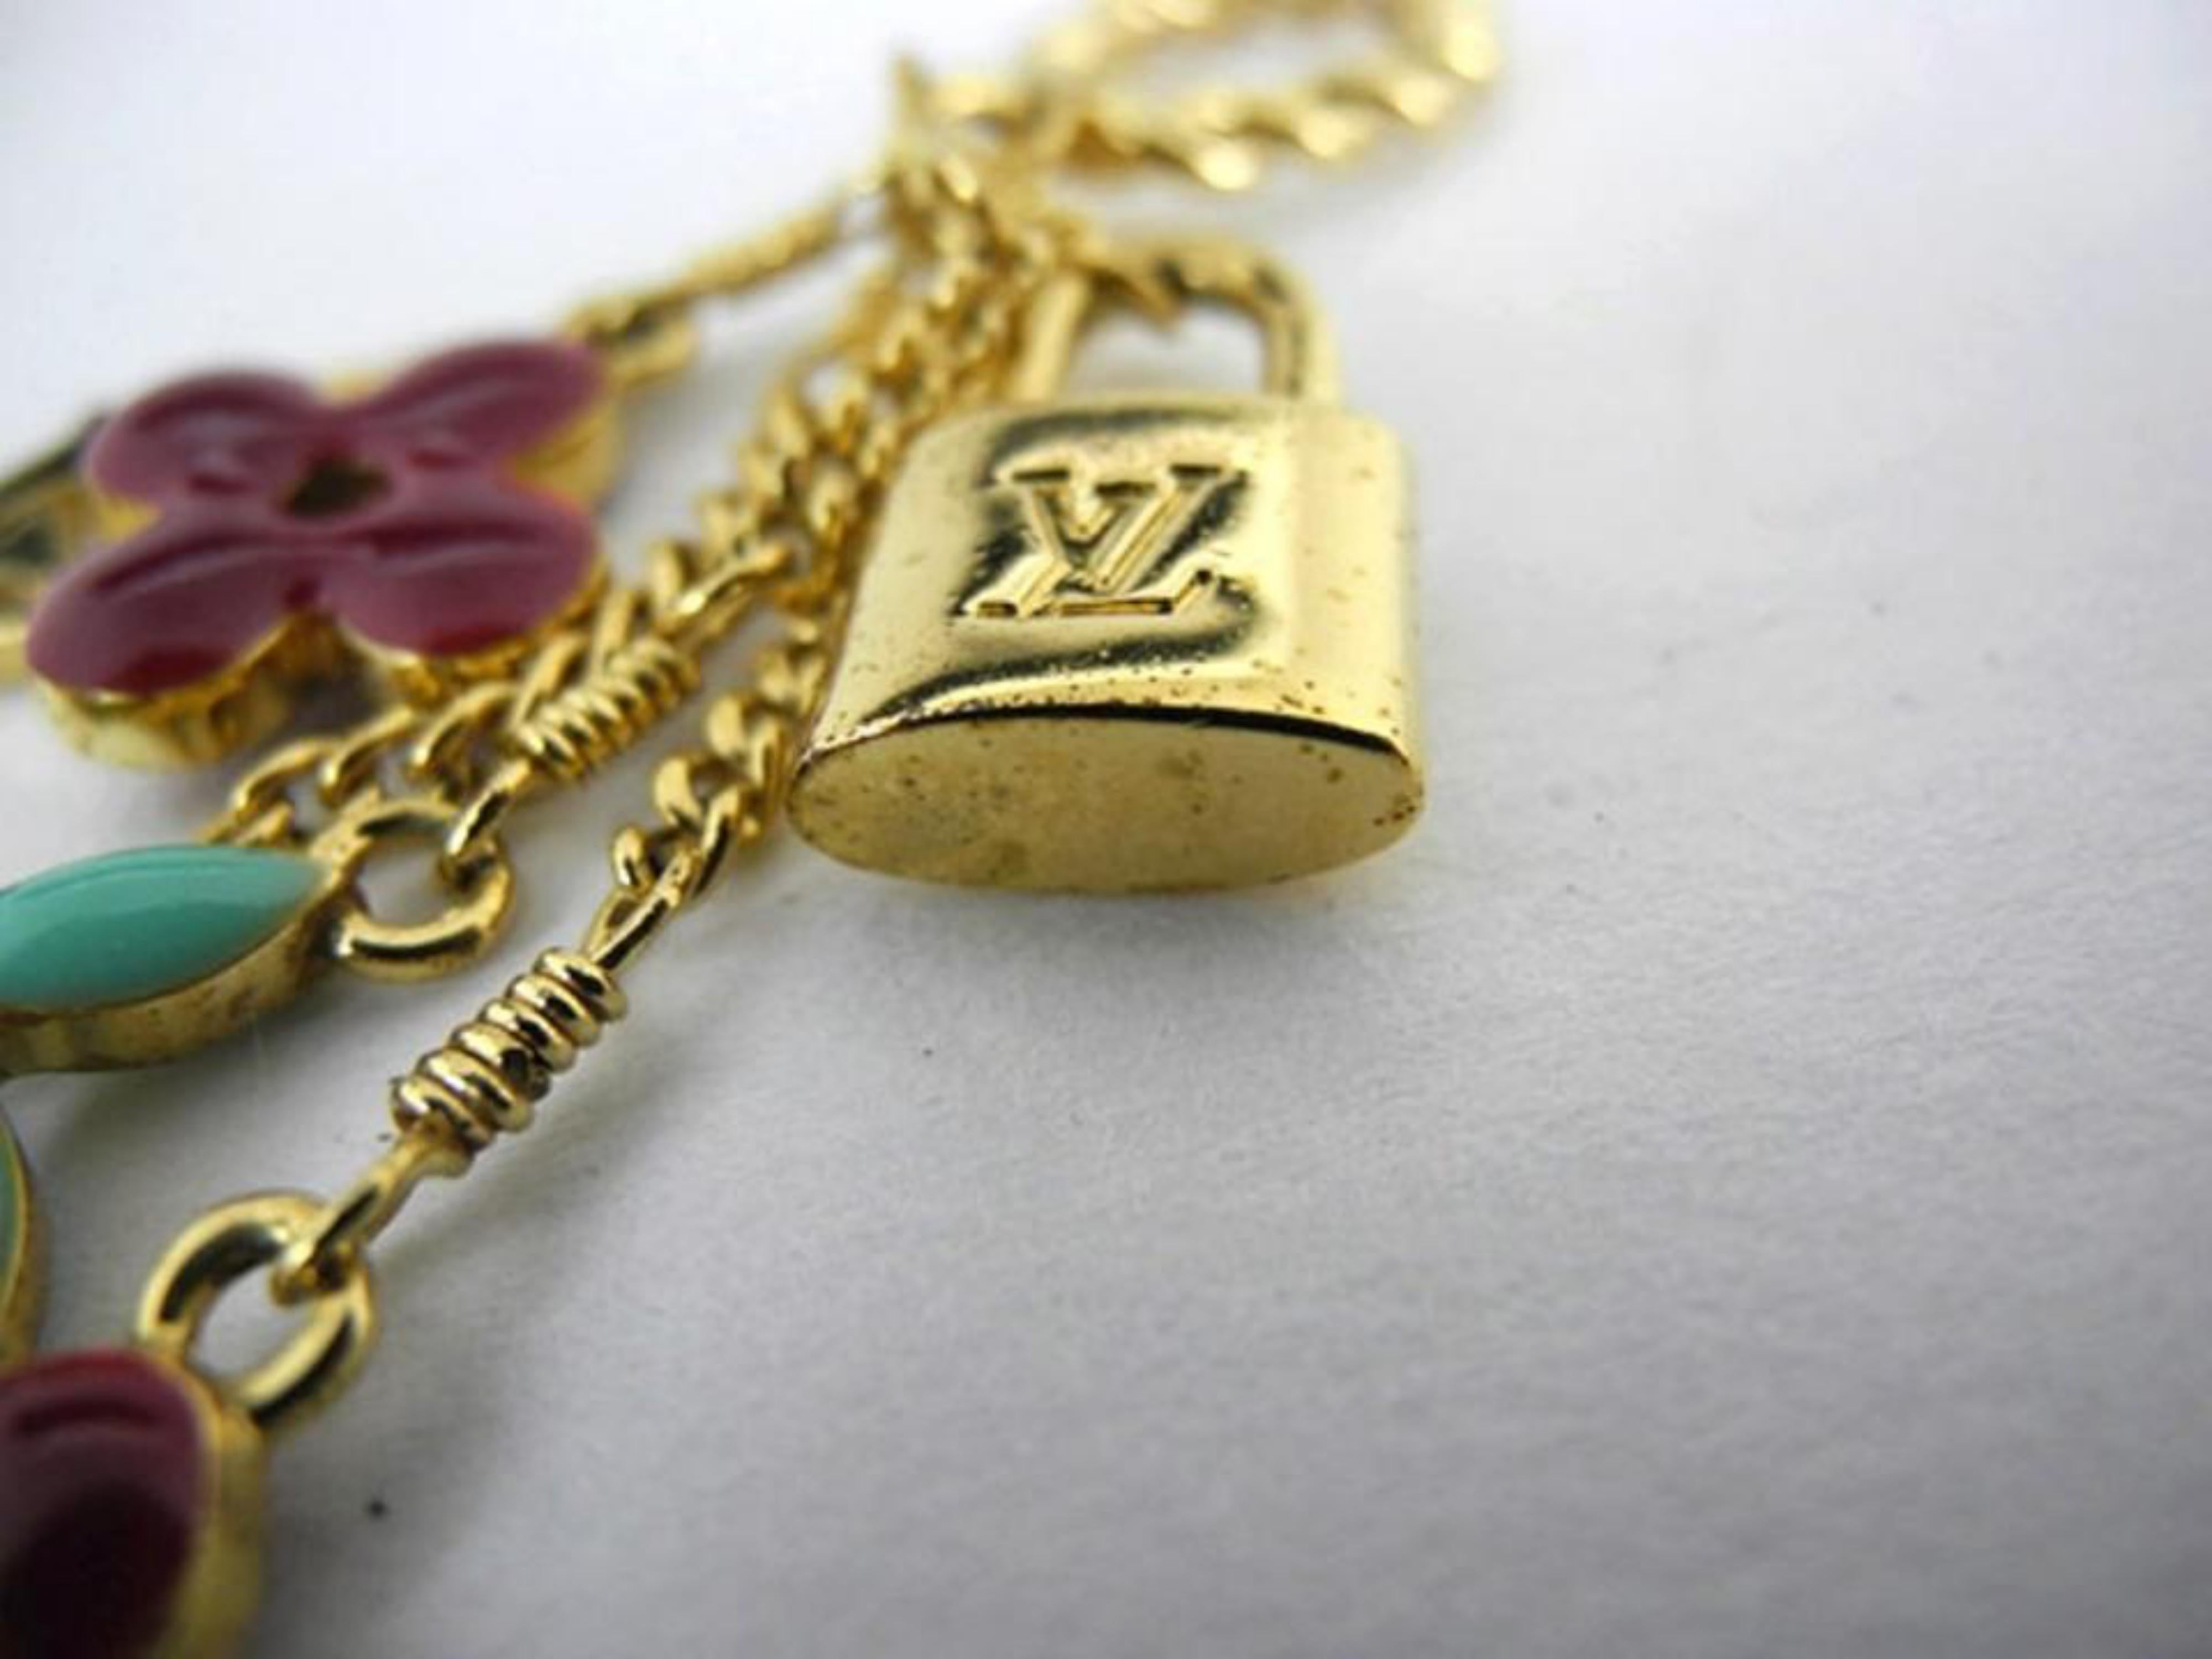 This item will ship immediately!!
Previously owned.
Made In: France
Measurements: Length of longest charm: 2